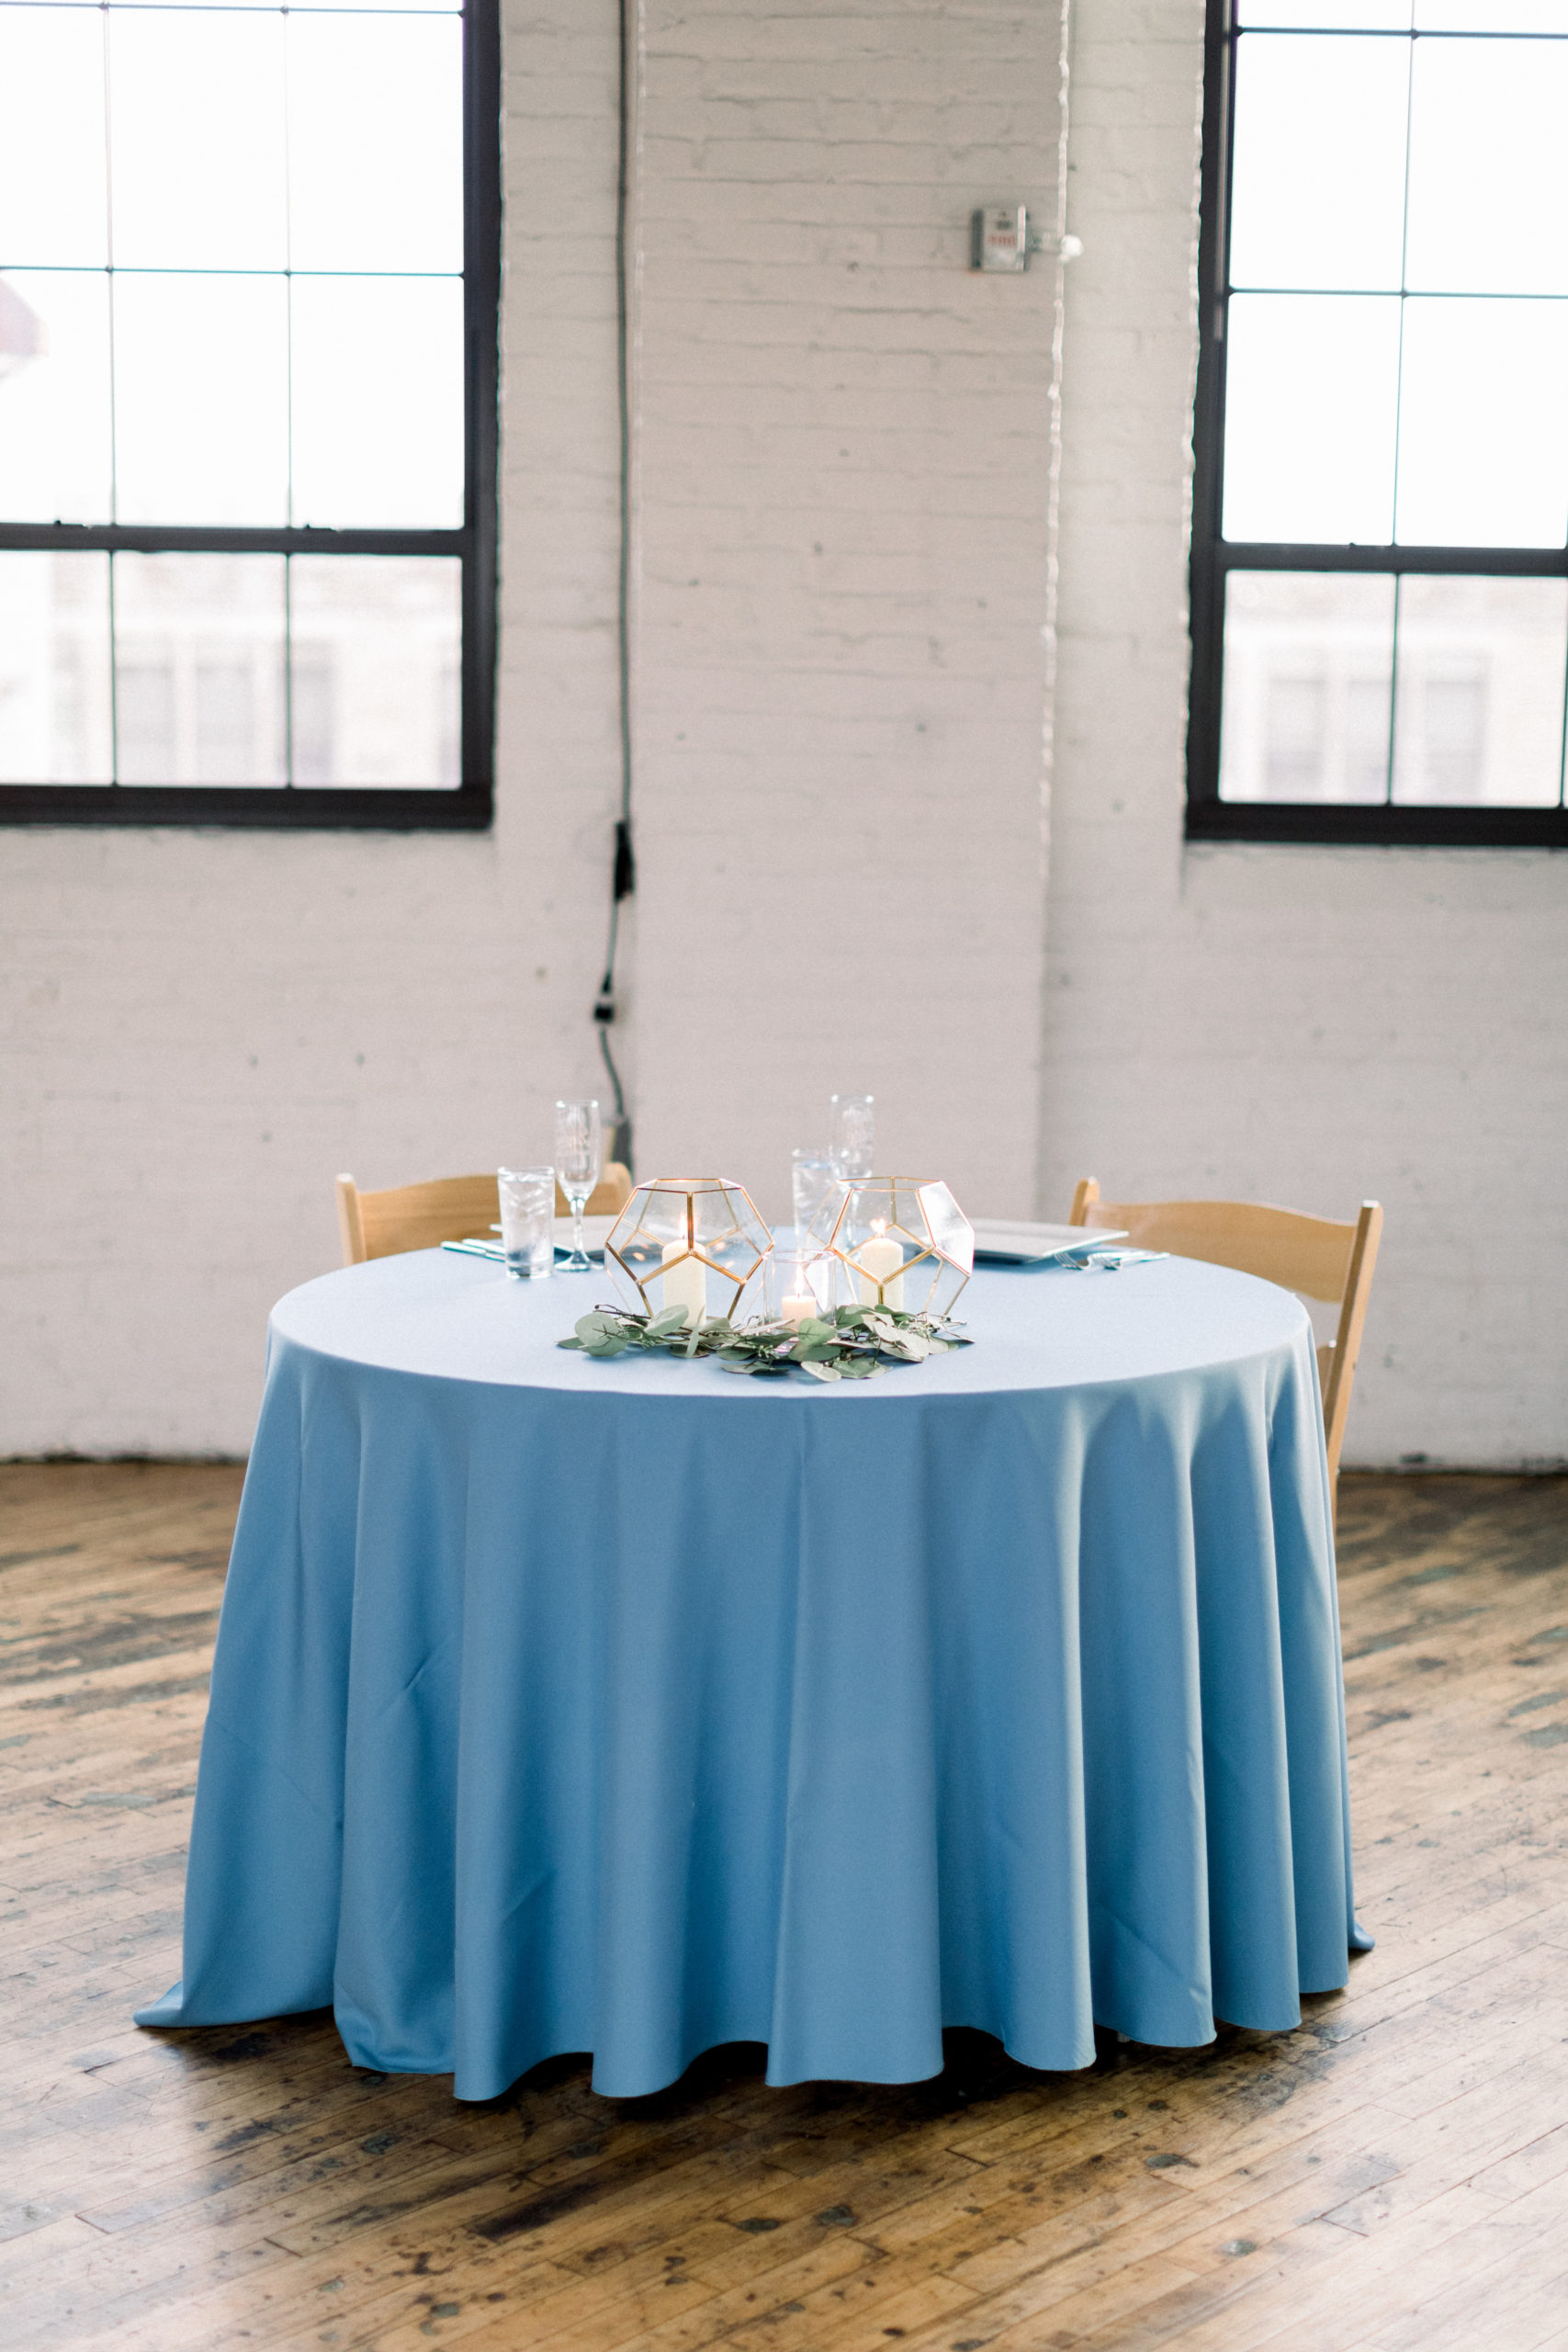 sweethearts table with blue tablecloth and plates